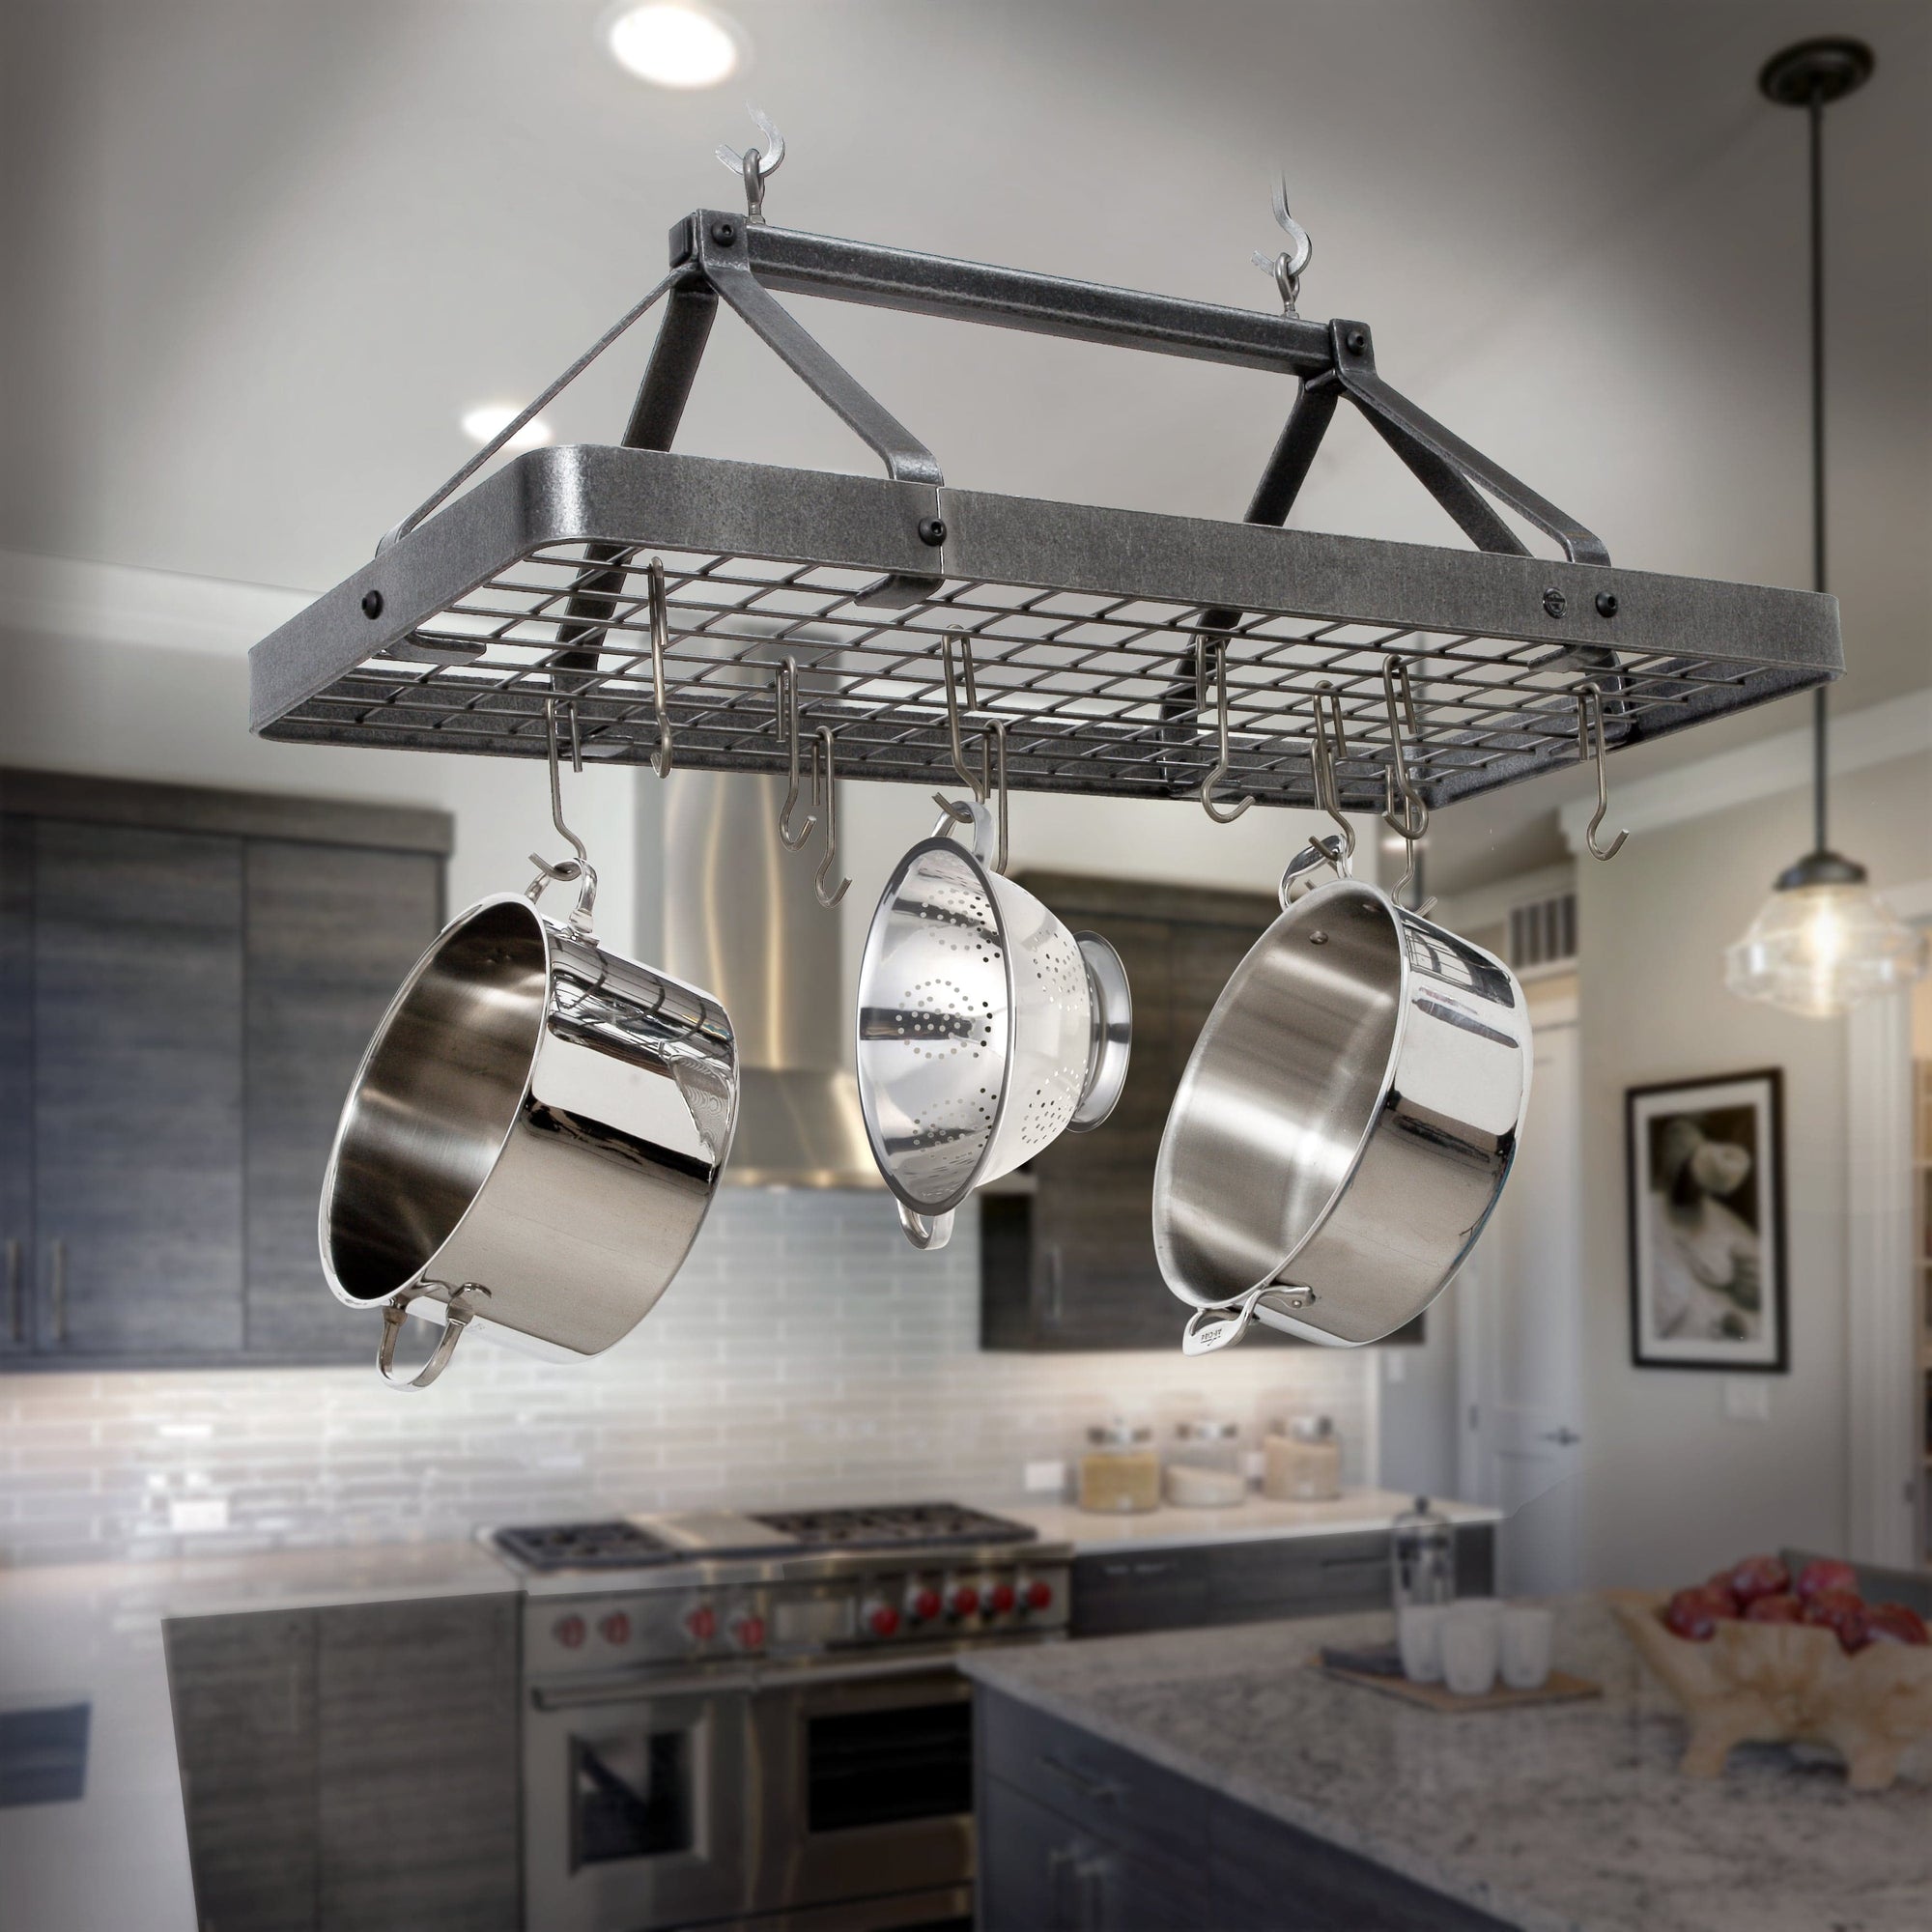 Enclume Carnival Rectangle Ceiling Pot Rack in Hammered Steel Enclume  Design Products